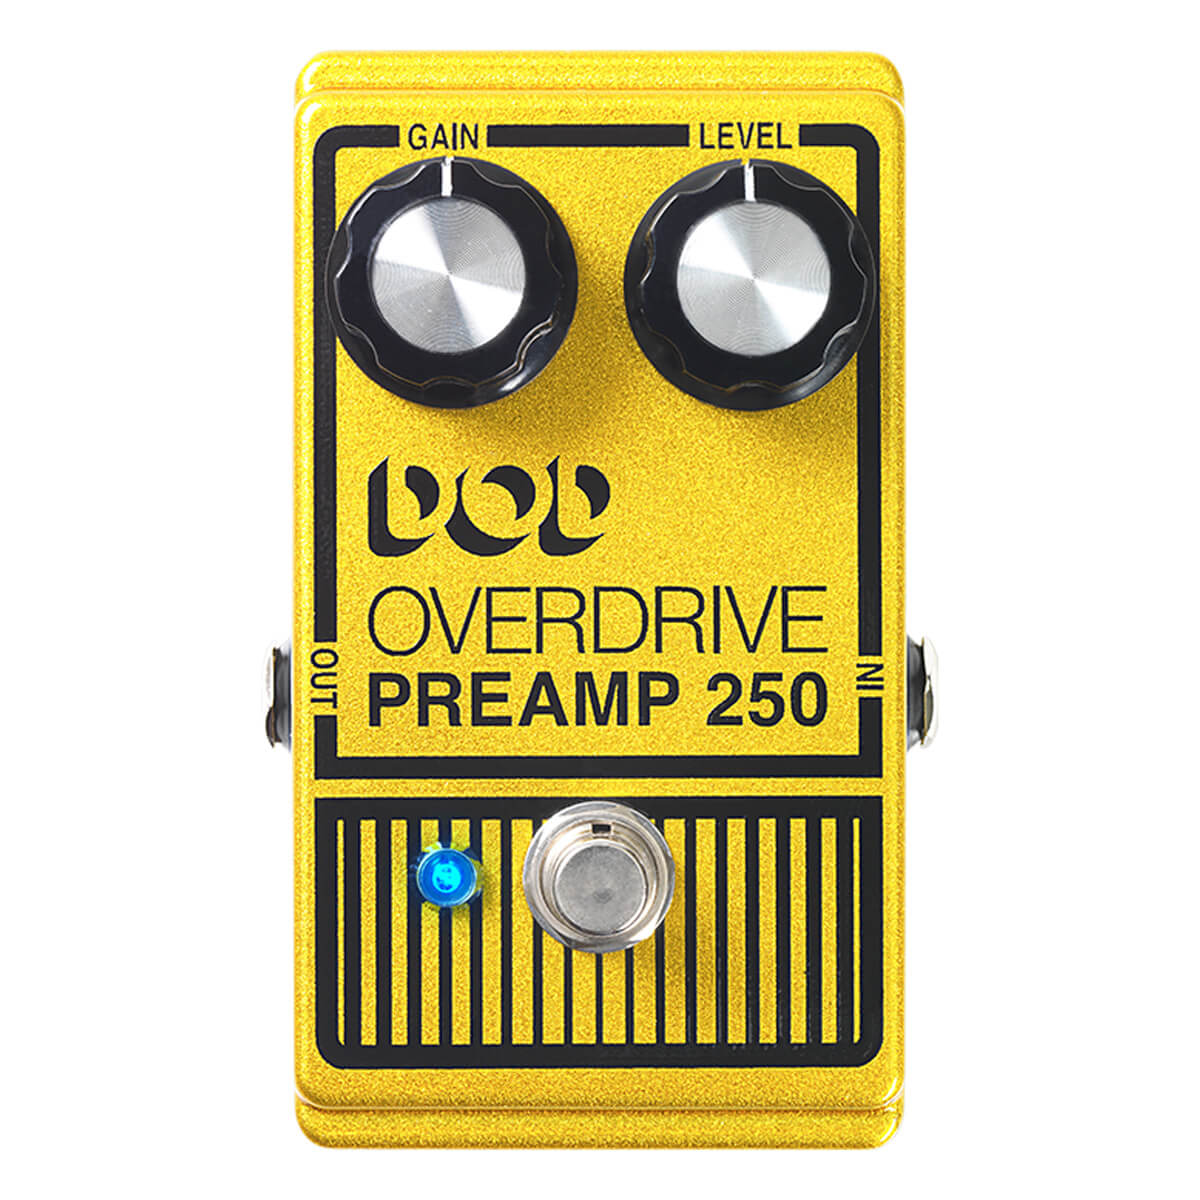 Dod Overdrive Preamp 250 Pedal Overdrive/Distortion Guitar Effects Pedal